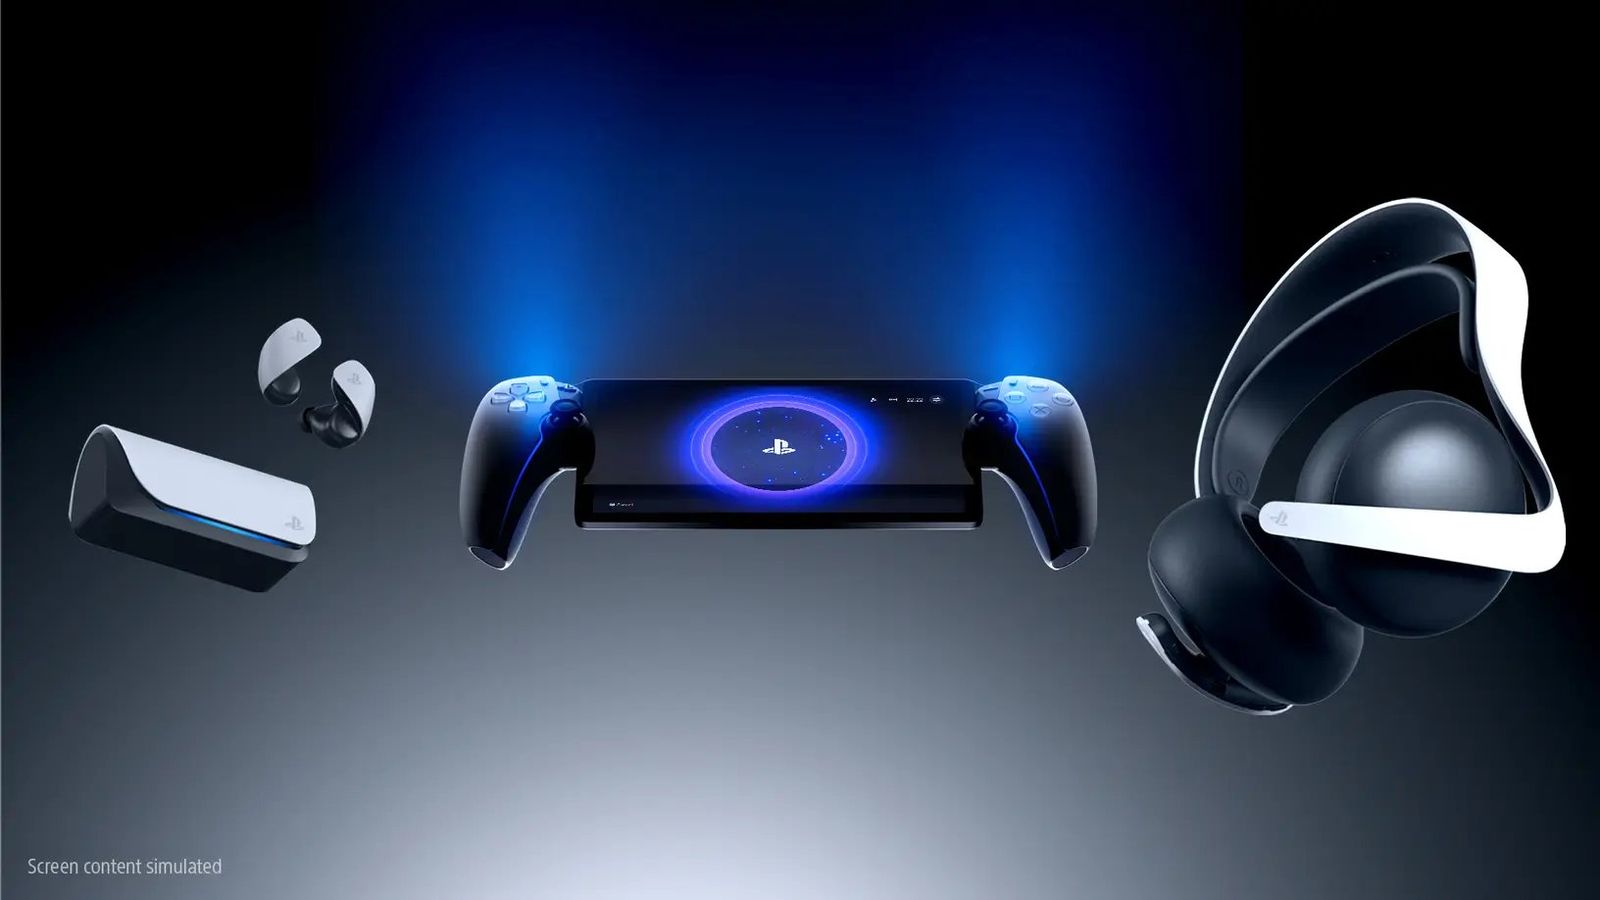 The PlayStation Portal is showcased alongside other accessories.